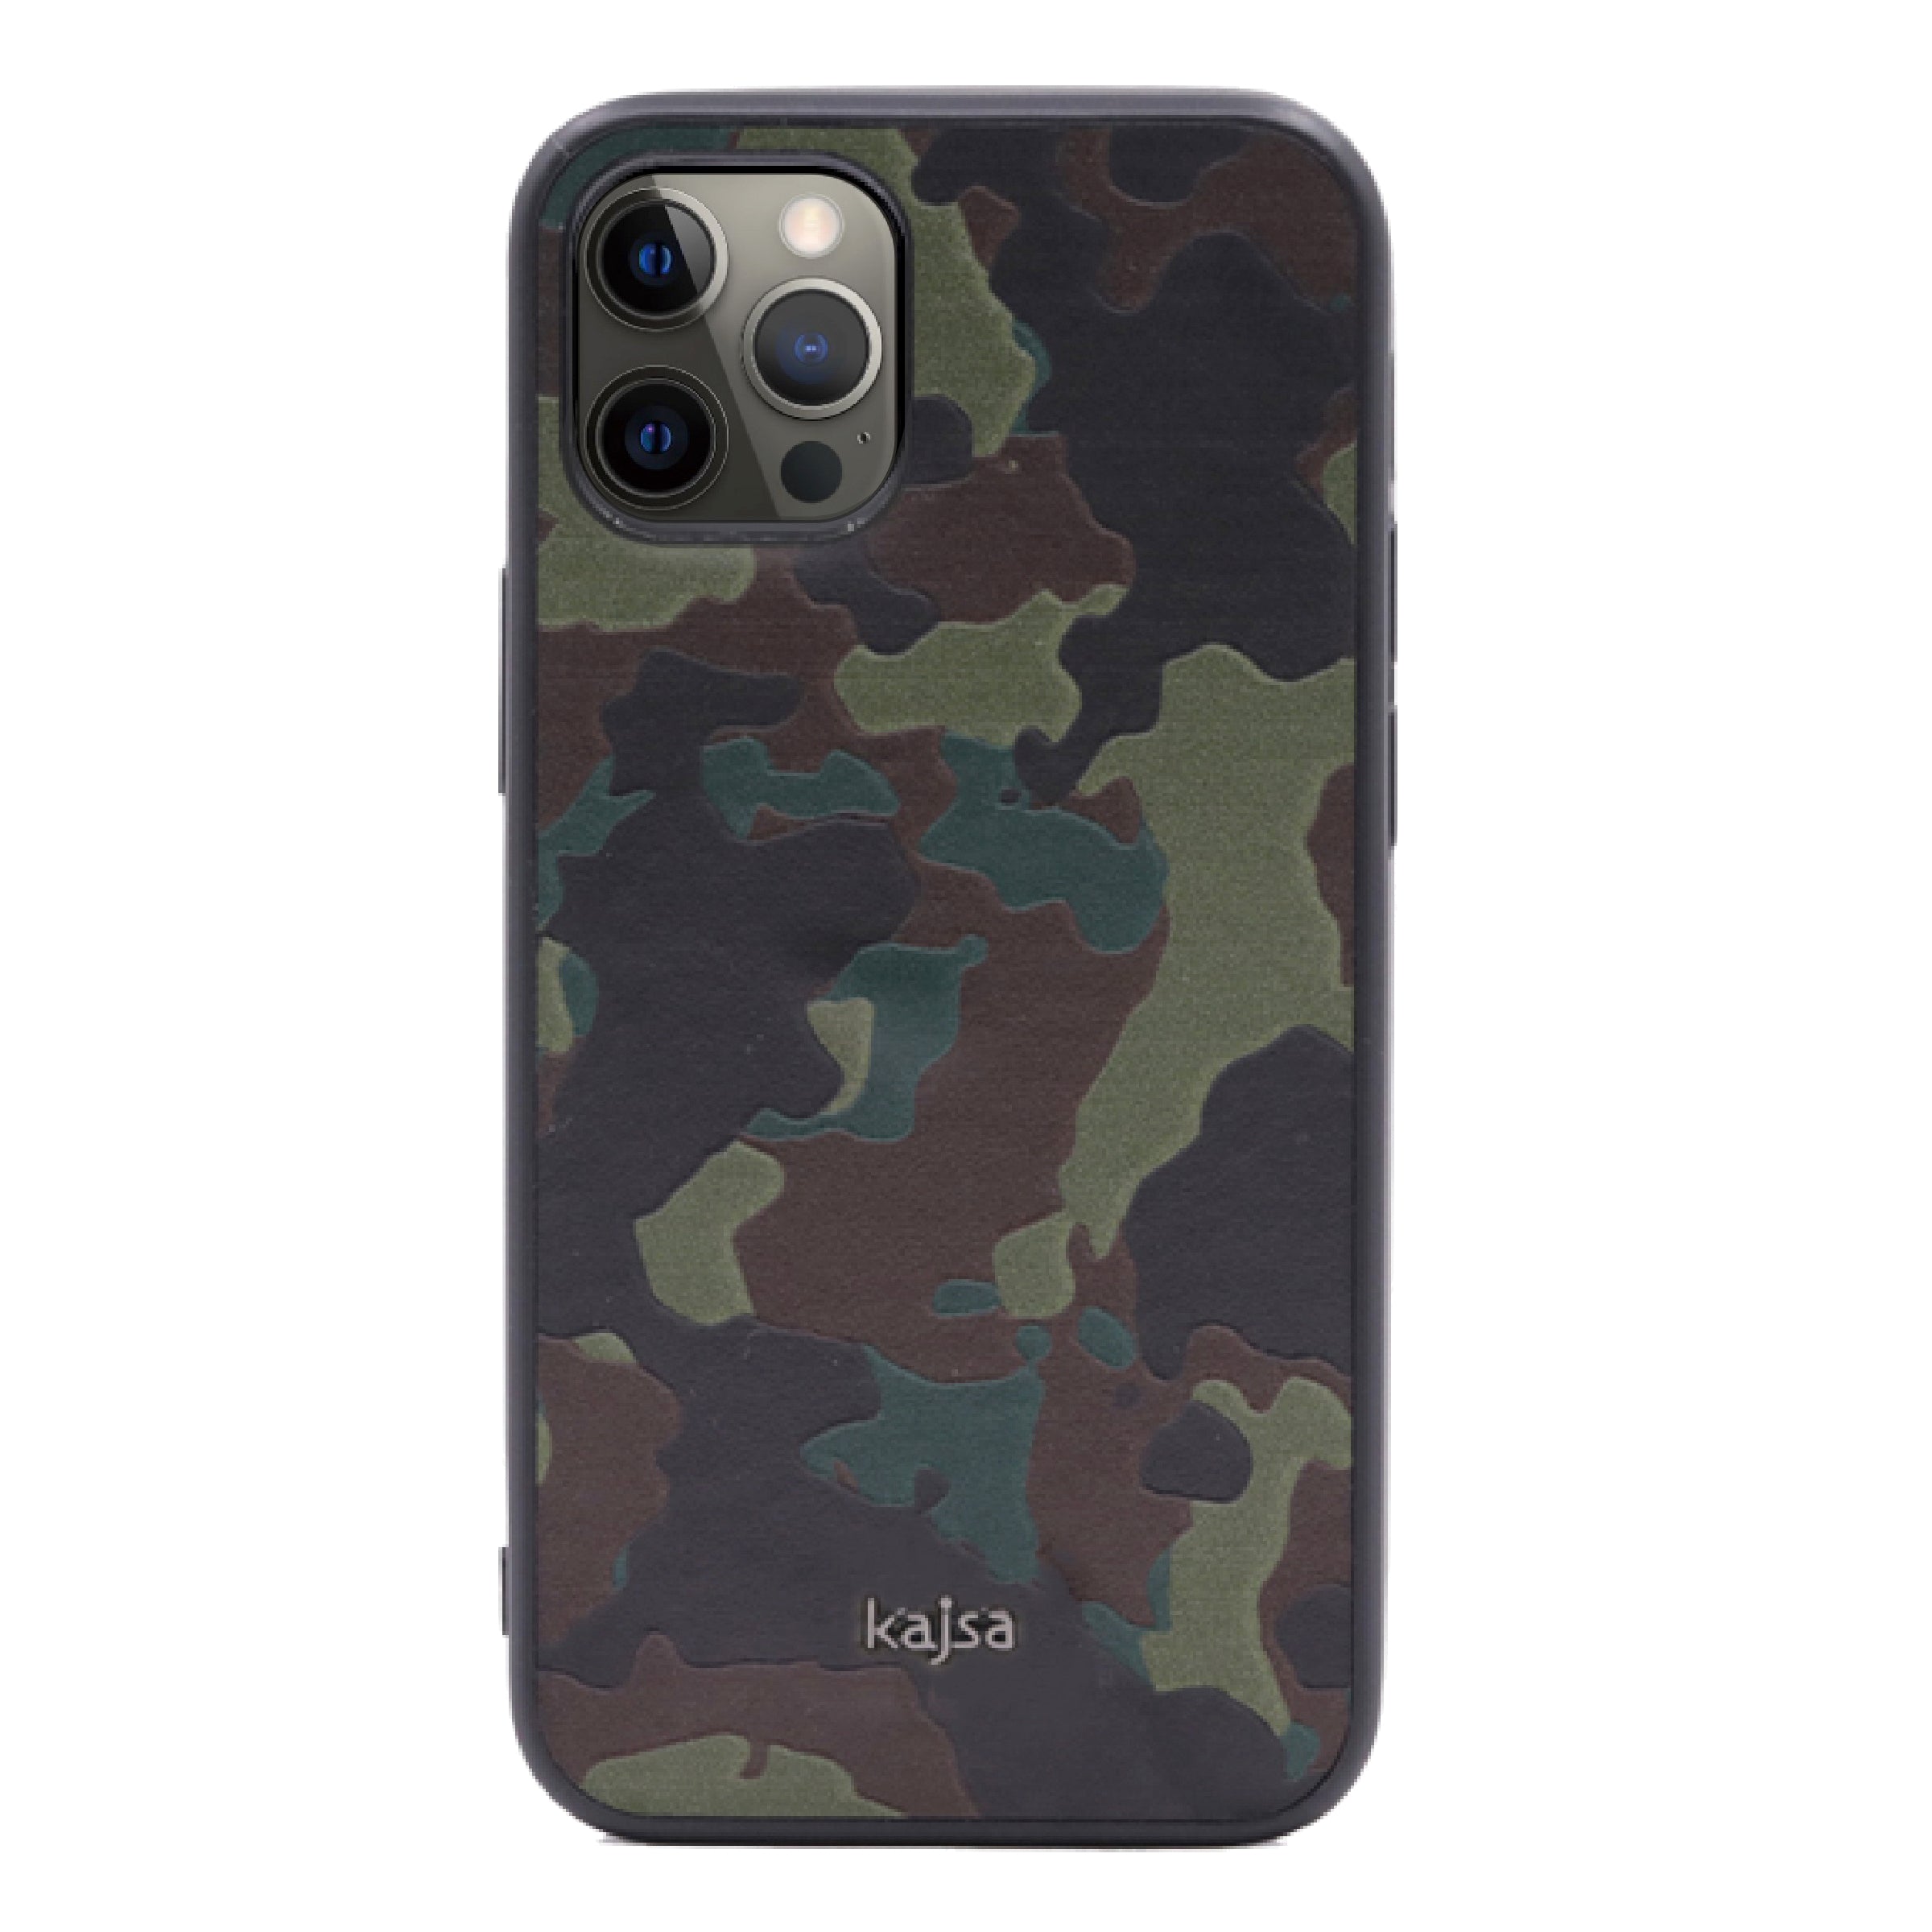 Military Collection - Back Case for iPhone 12-Phone Case- phone case - phone cases- phone cover- iphone cover- iphone case- iphone cases- leather case- leather cases- DIYCASE - custom case - leather cover - hand strap case - croco pattern case - snake pattern case - carbon fiber phone case - phone case brand - unique phone case - high quality - phone case brand - protective case - buy phone case hong kong - online buy phone case - iphone‎手機殼 - 客製化手機殼 - samsung ‎手機殼 - 香港手機殼 - 買電話殼